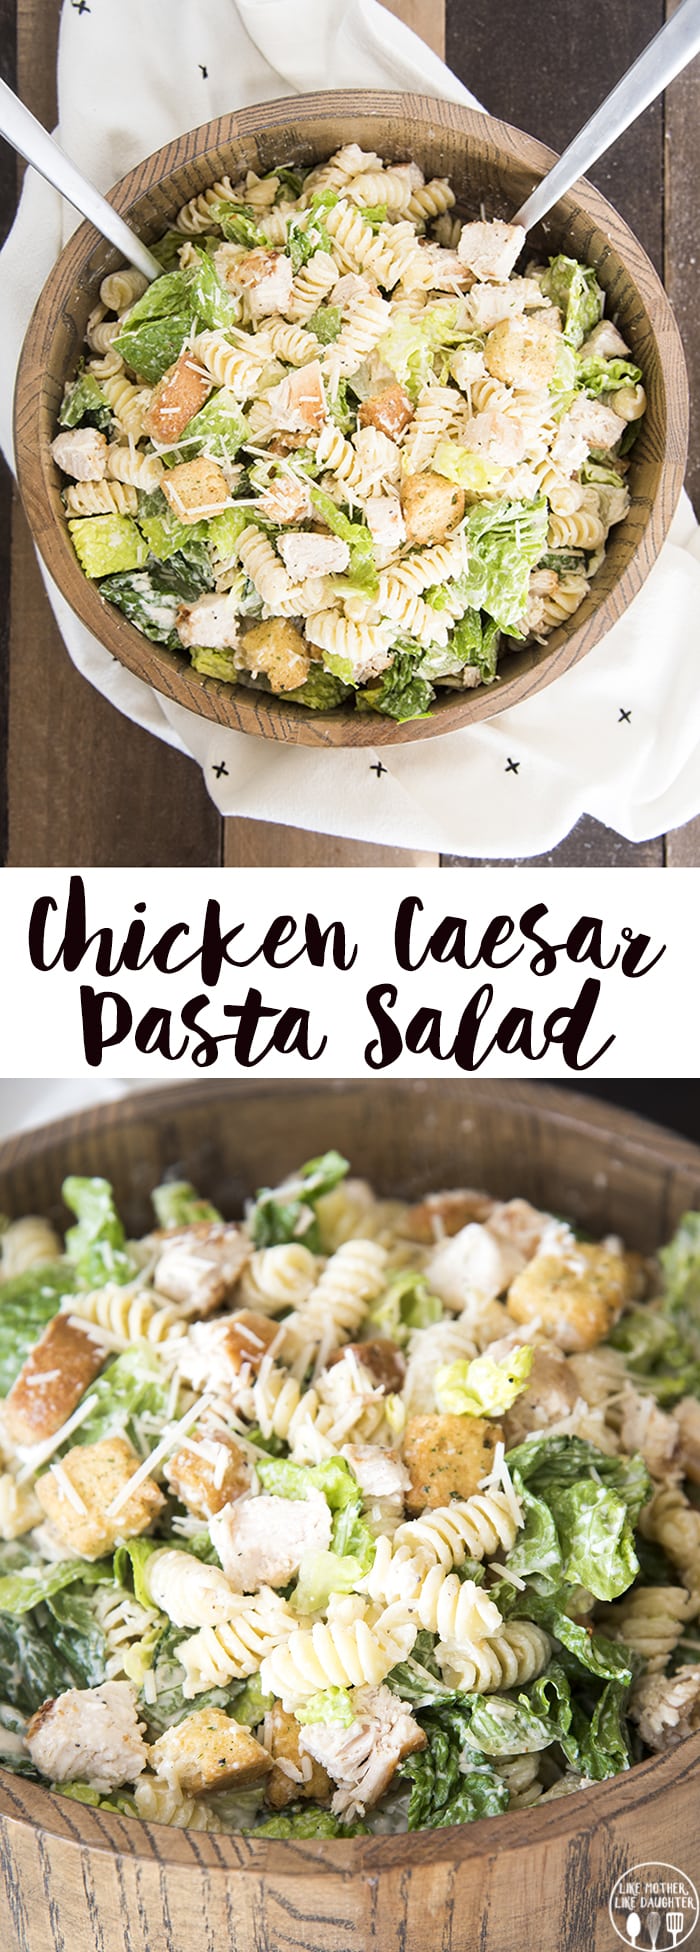 Chicken Caesar pasta salad is a delicious mix of pasta salad and chicken Caesar salad and is perfect for lunch or a light dinner!